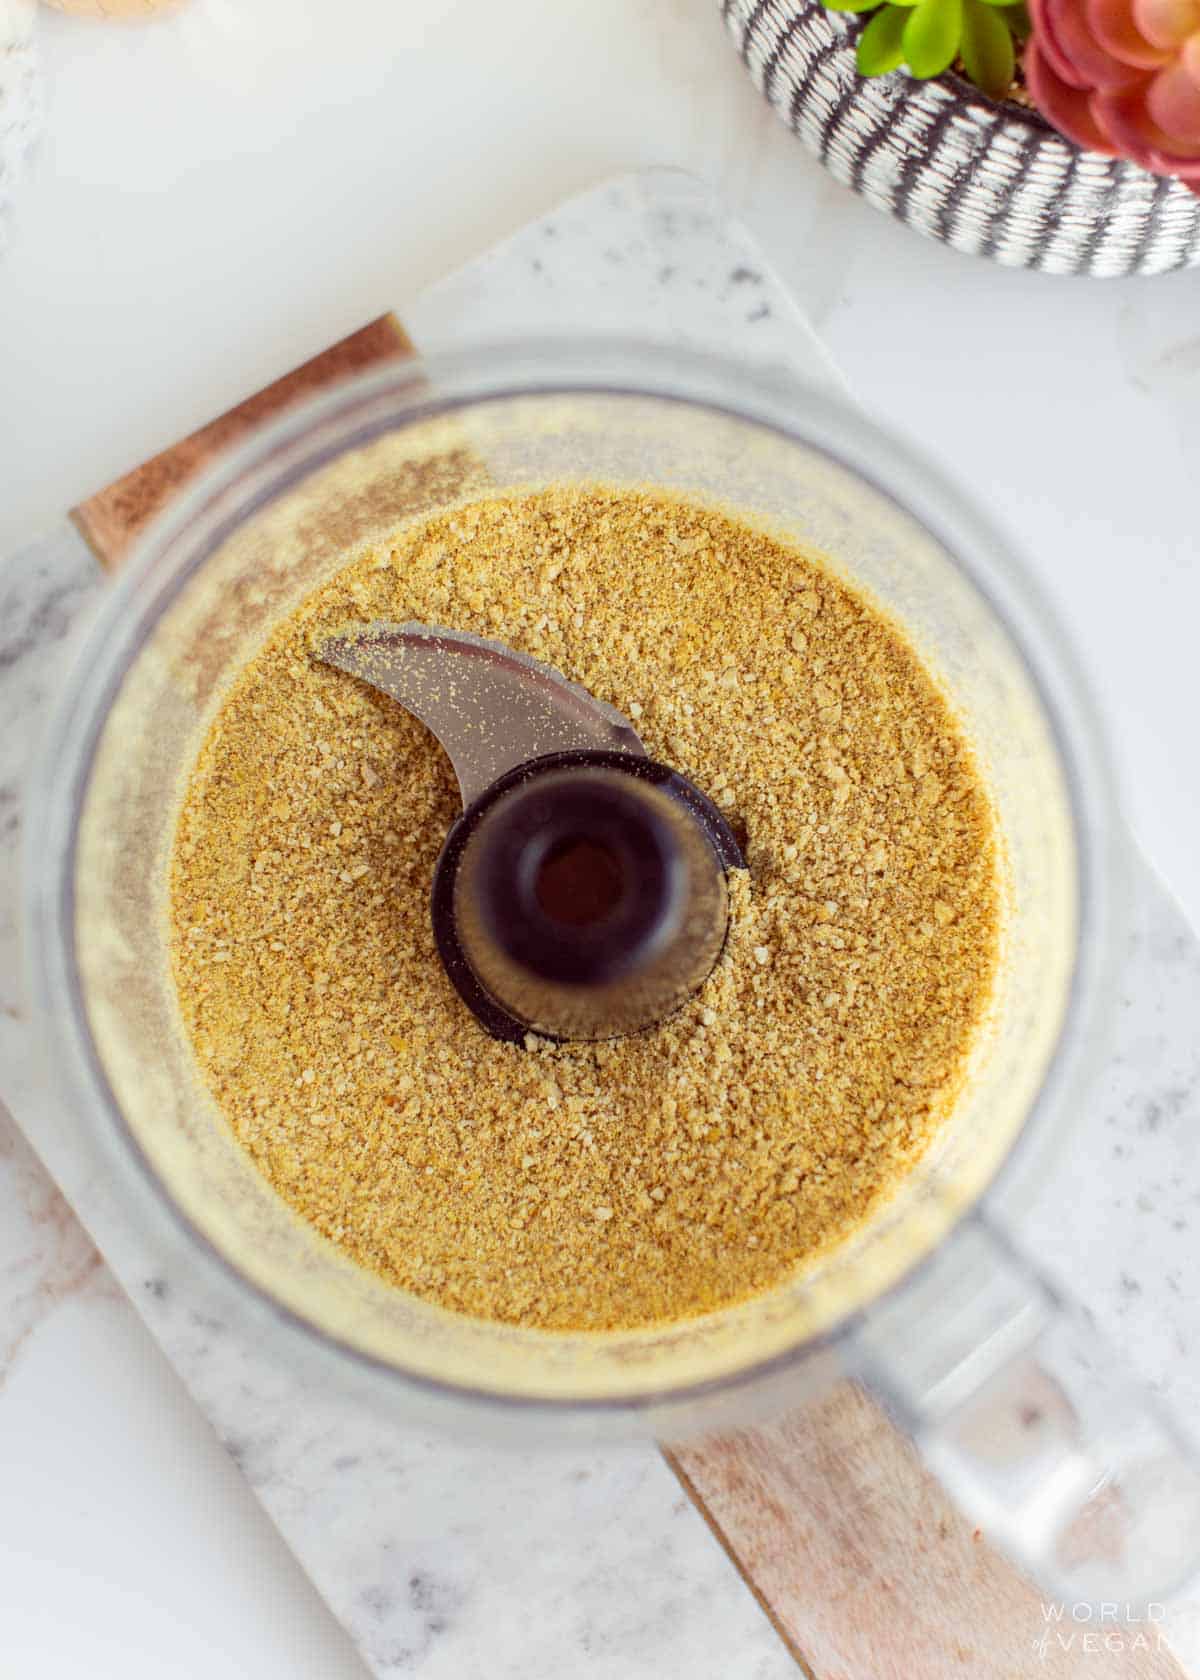 Homemade vegan parmesan cheese, blended in a food processor.